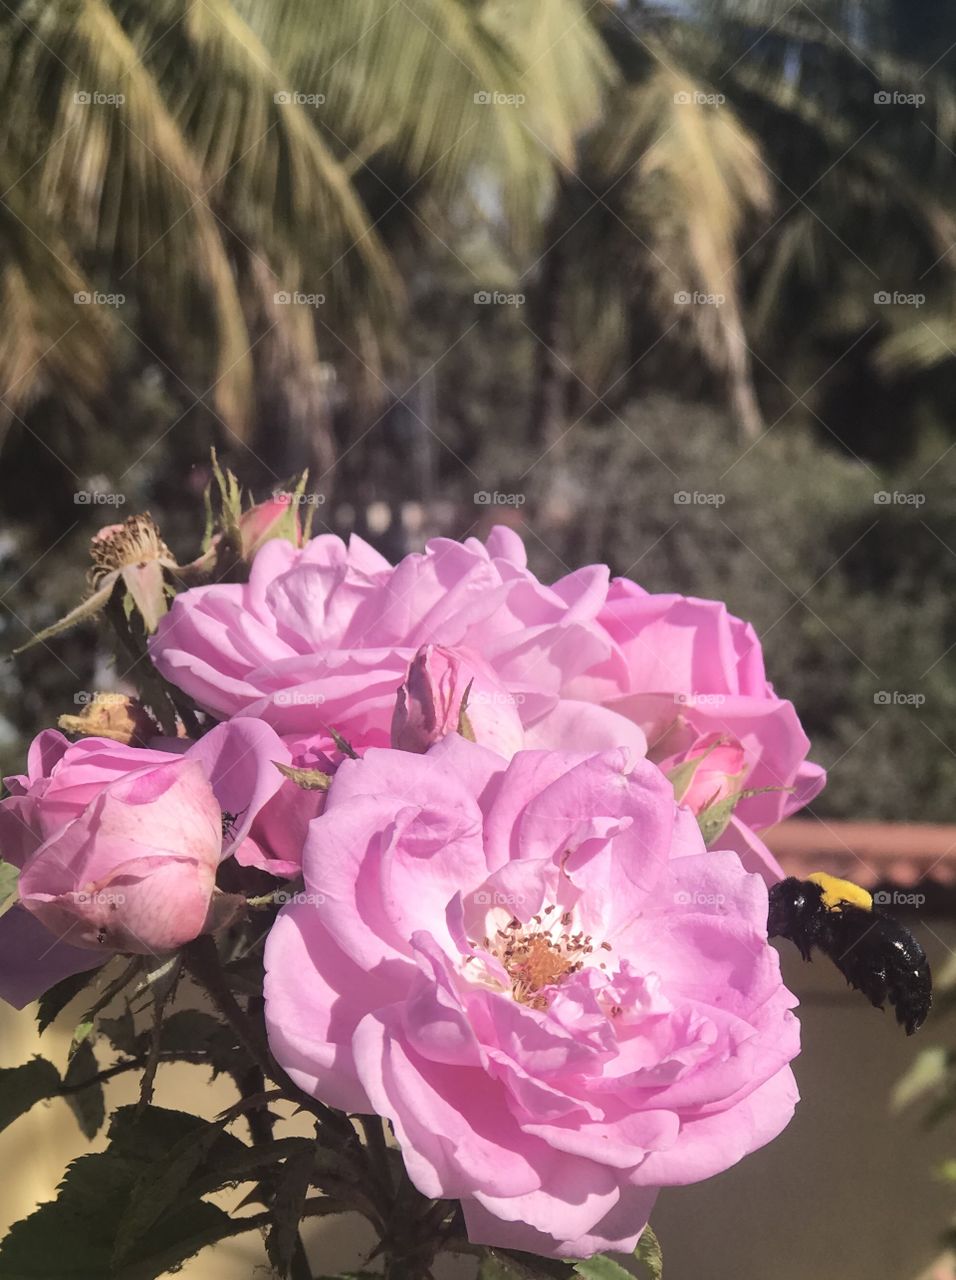 Bumble bee and pink roses